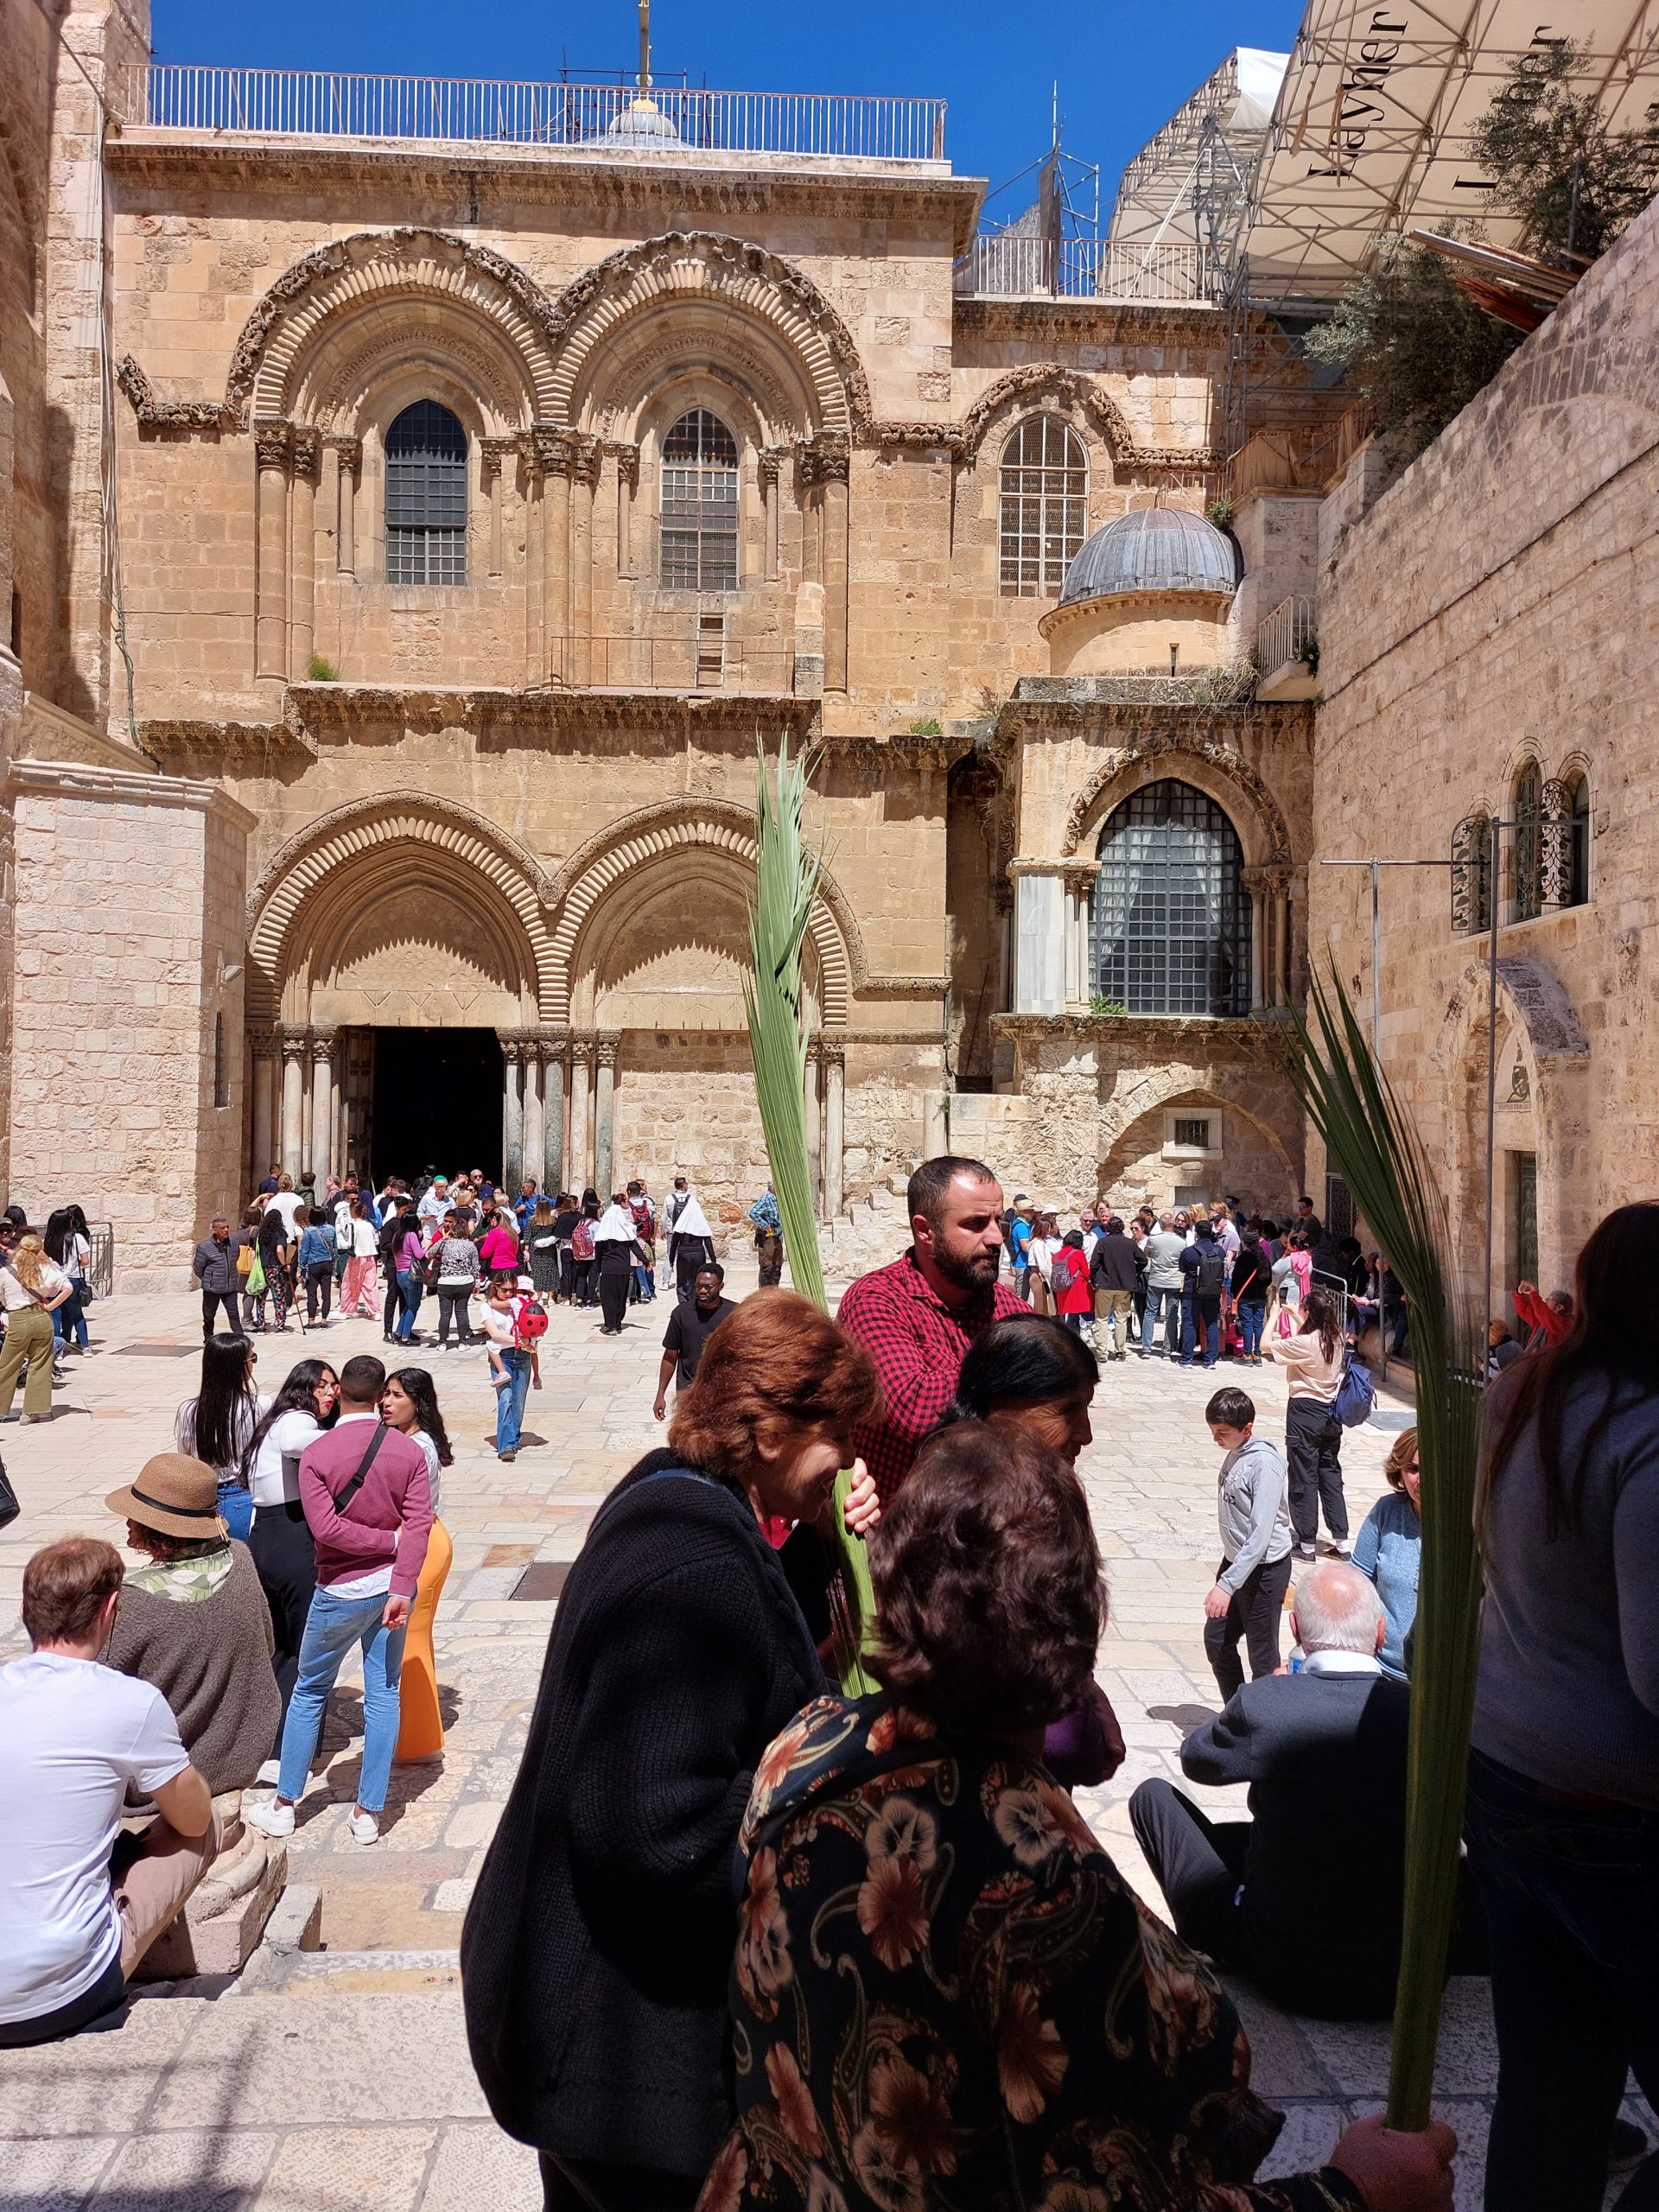 The Palm Sunday Processional